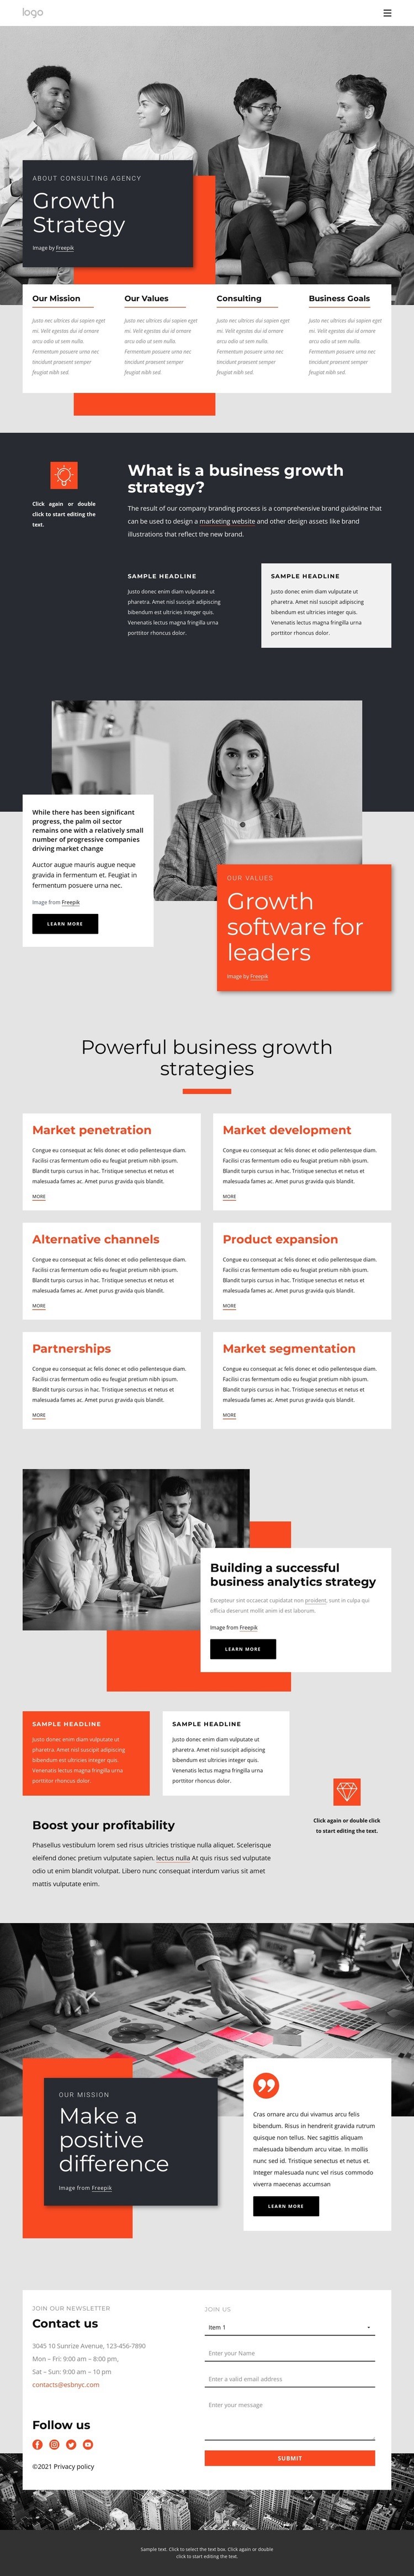 Growth strategy consultants Homepage Design